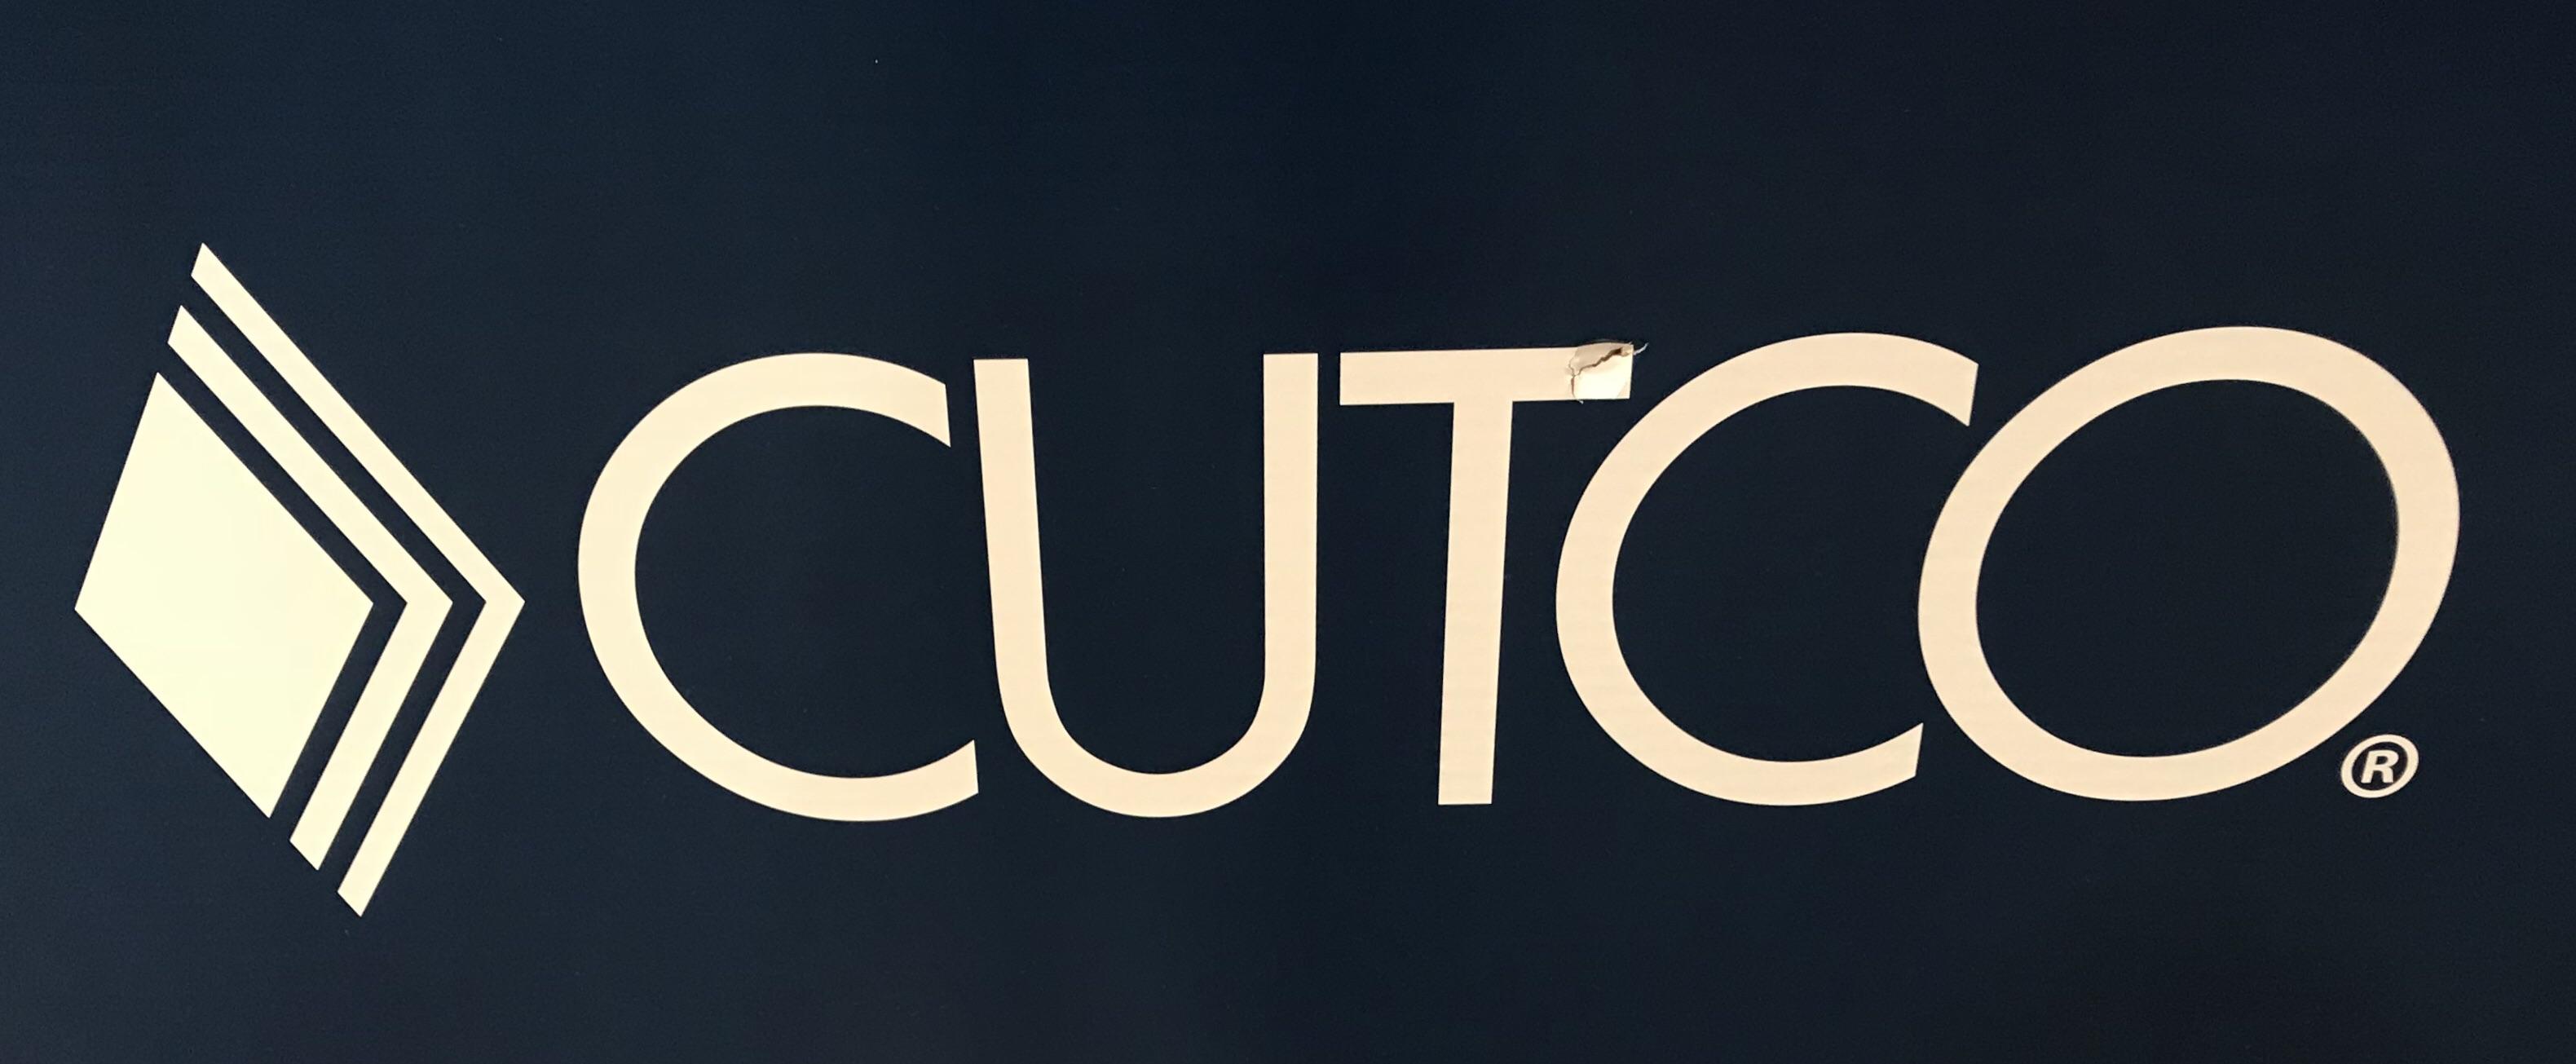 CUTCO Logo - Someone stole Homer's suggestion for a name that's “Cutting-edge ...